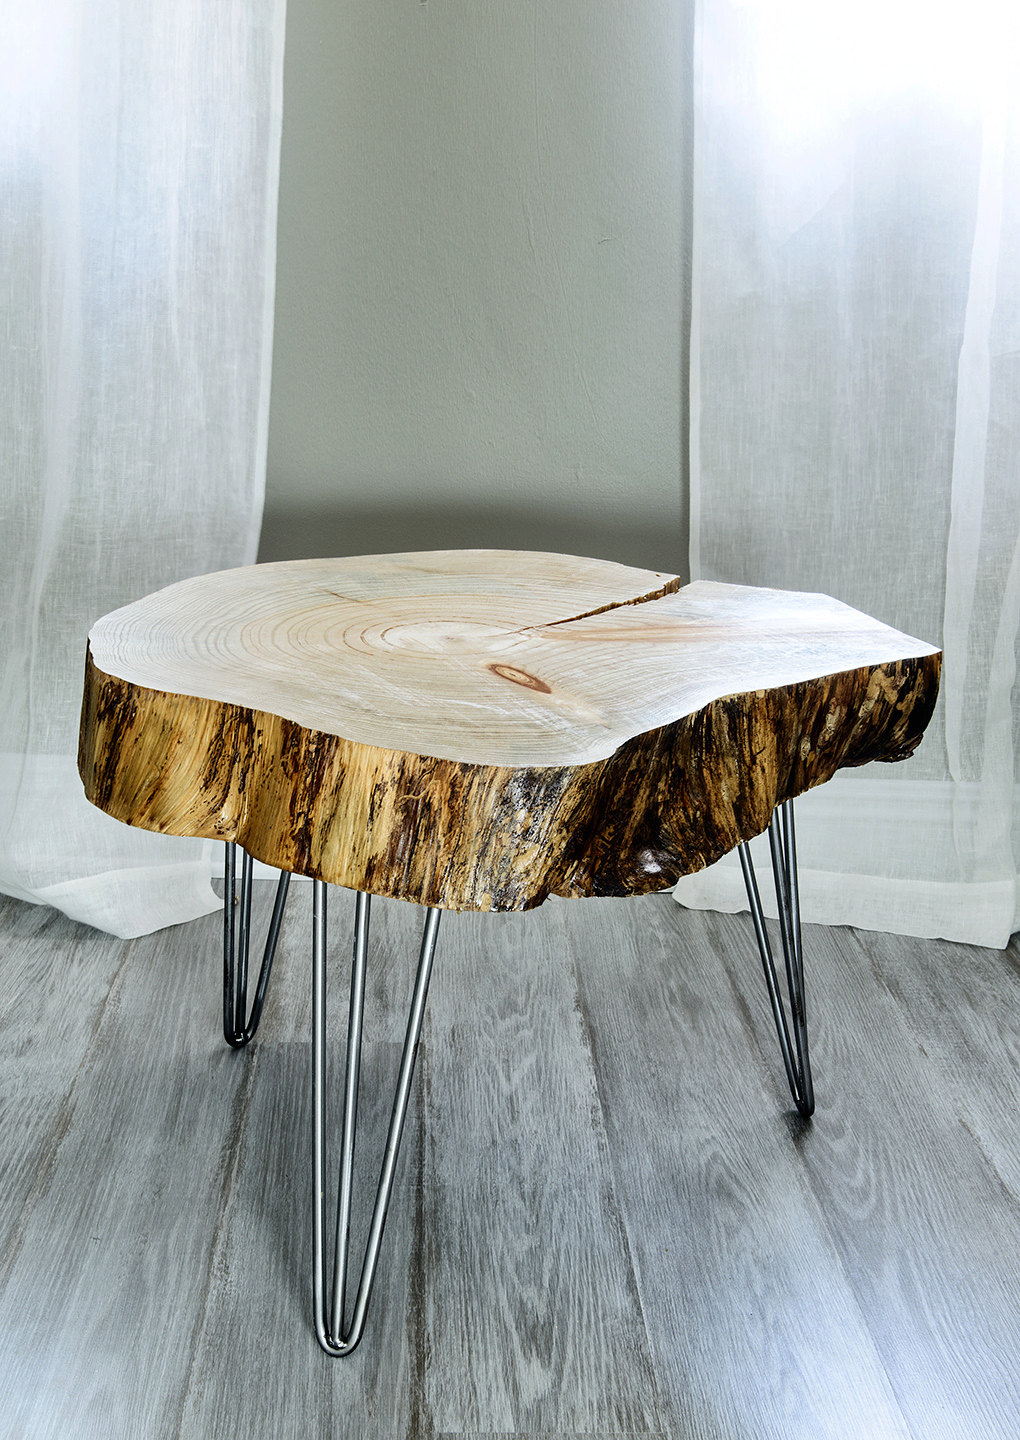 timber beds the super beautiful wood trunk end table tree coffee diy bases tables for reclaimed canary island pine very unusual carved chinoiseri style distressed round accent